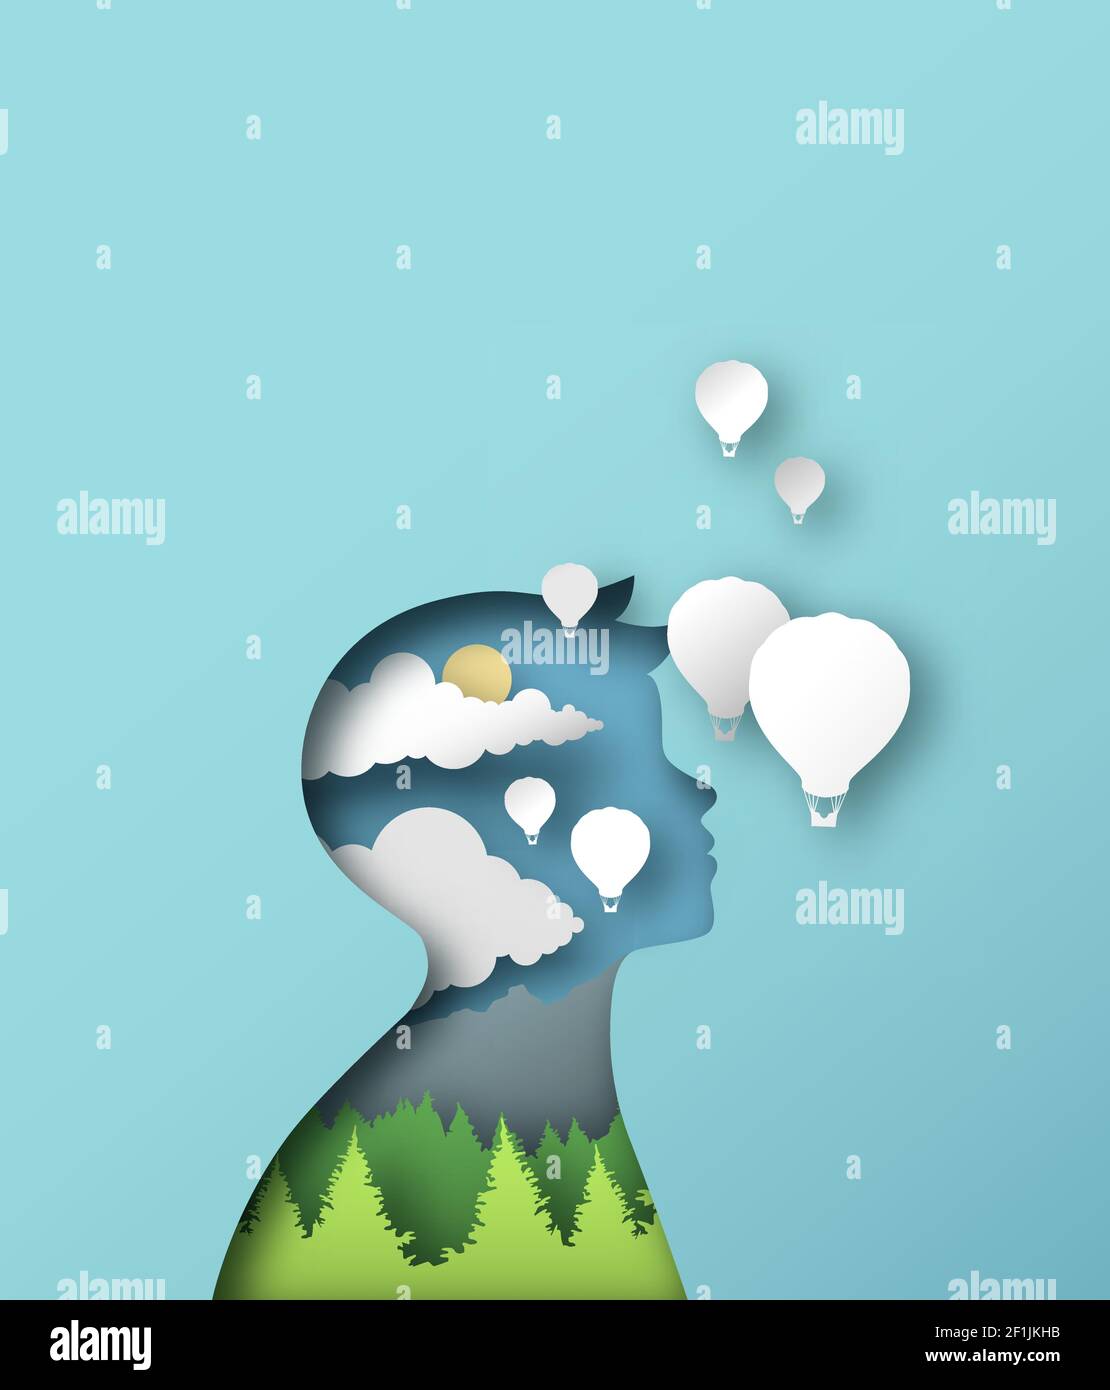 Little boy with hot air balloons, forest landscape and sky in modern paper cut craft style. Child imagination or student education concept. Stock Vector